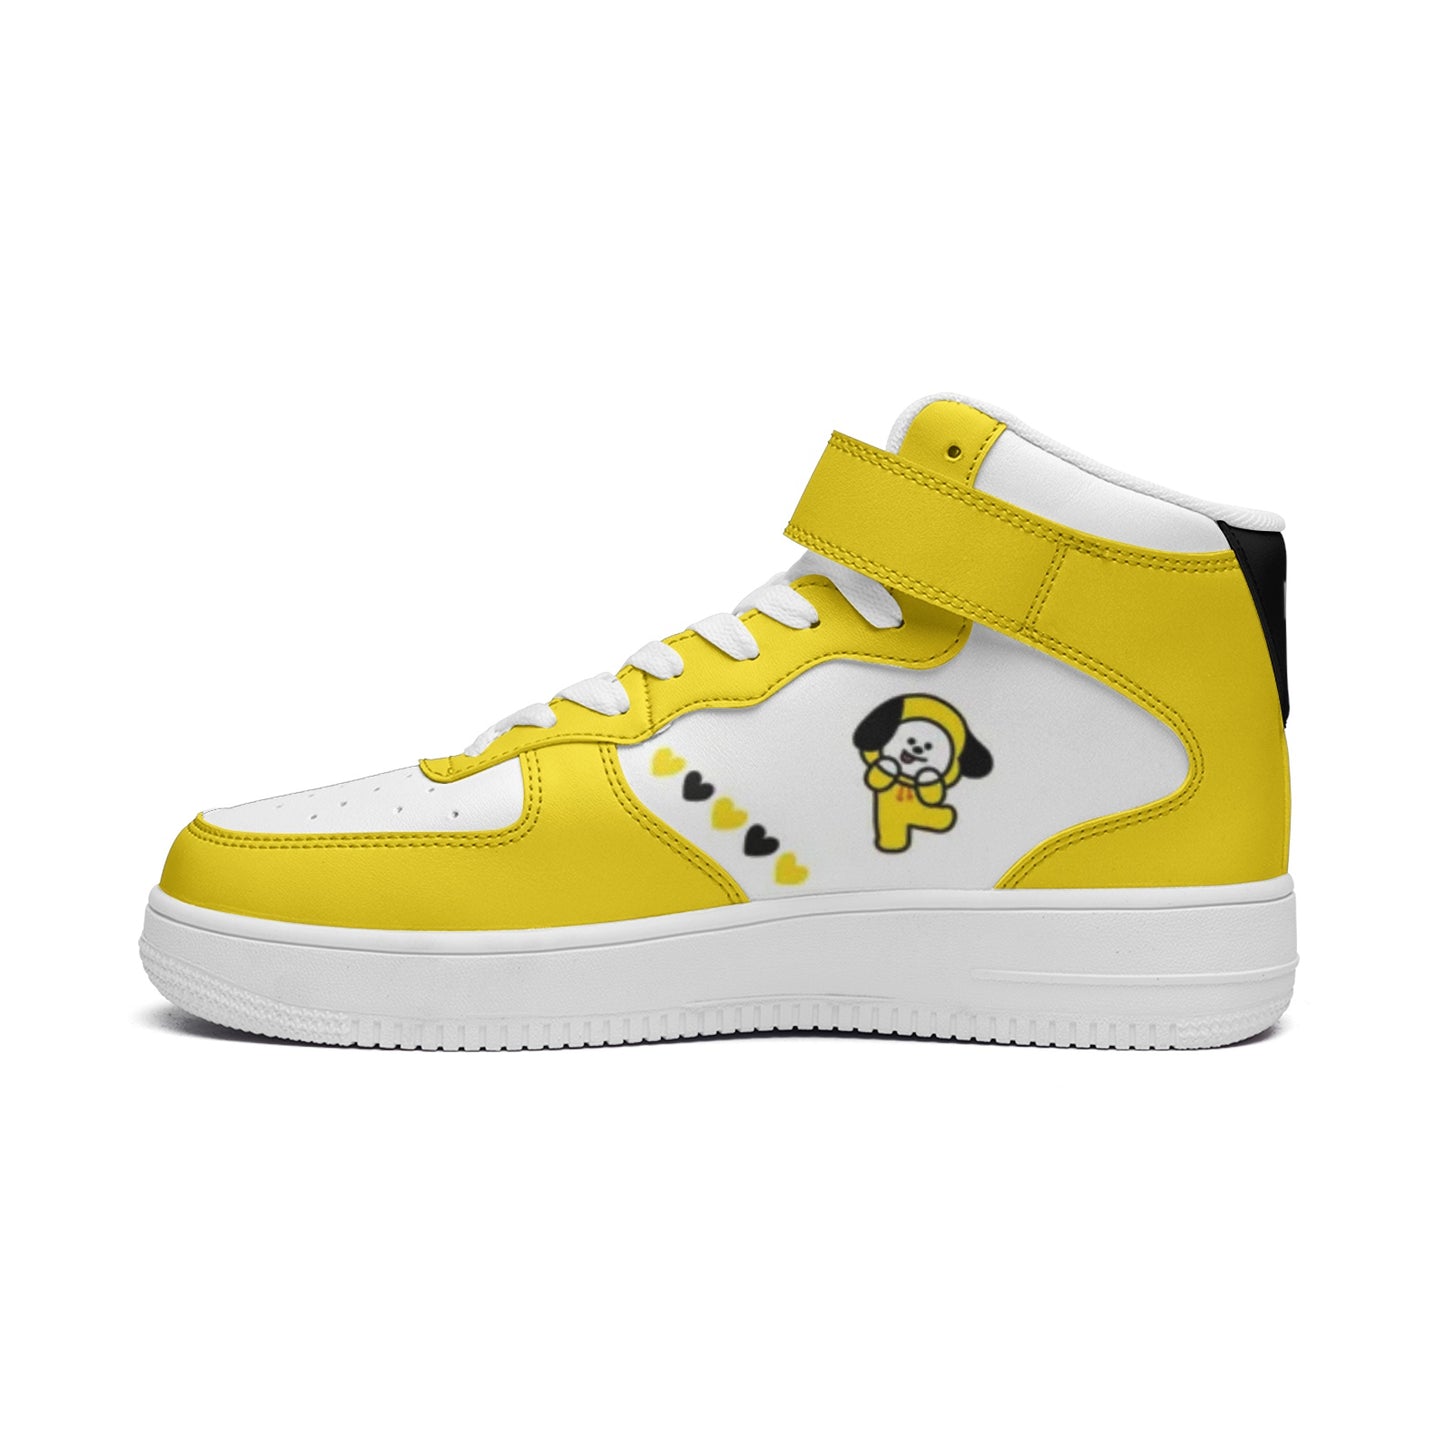 BT21 Chimmy Unisex high Top Leather Sneakers